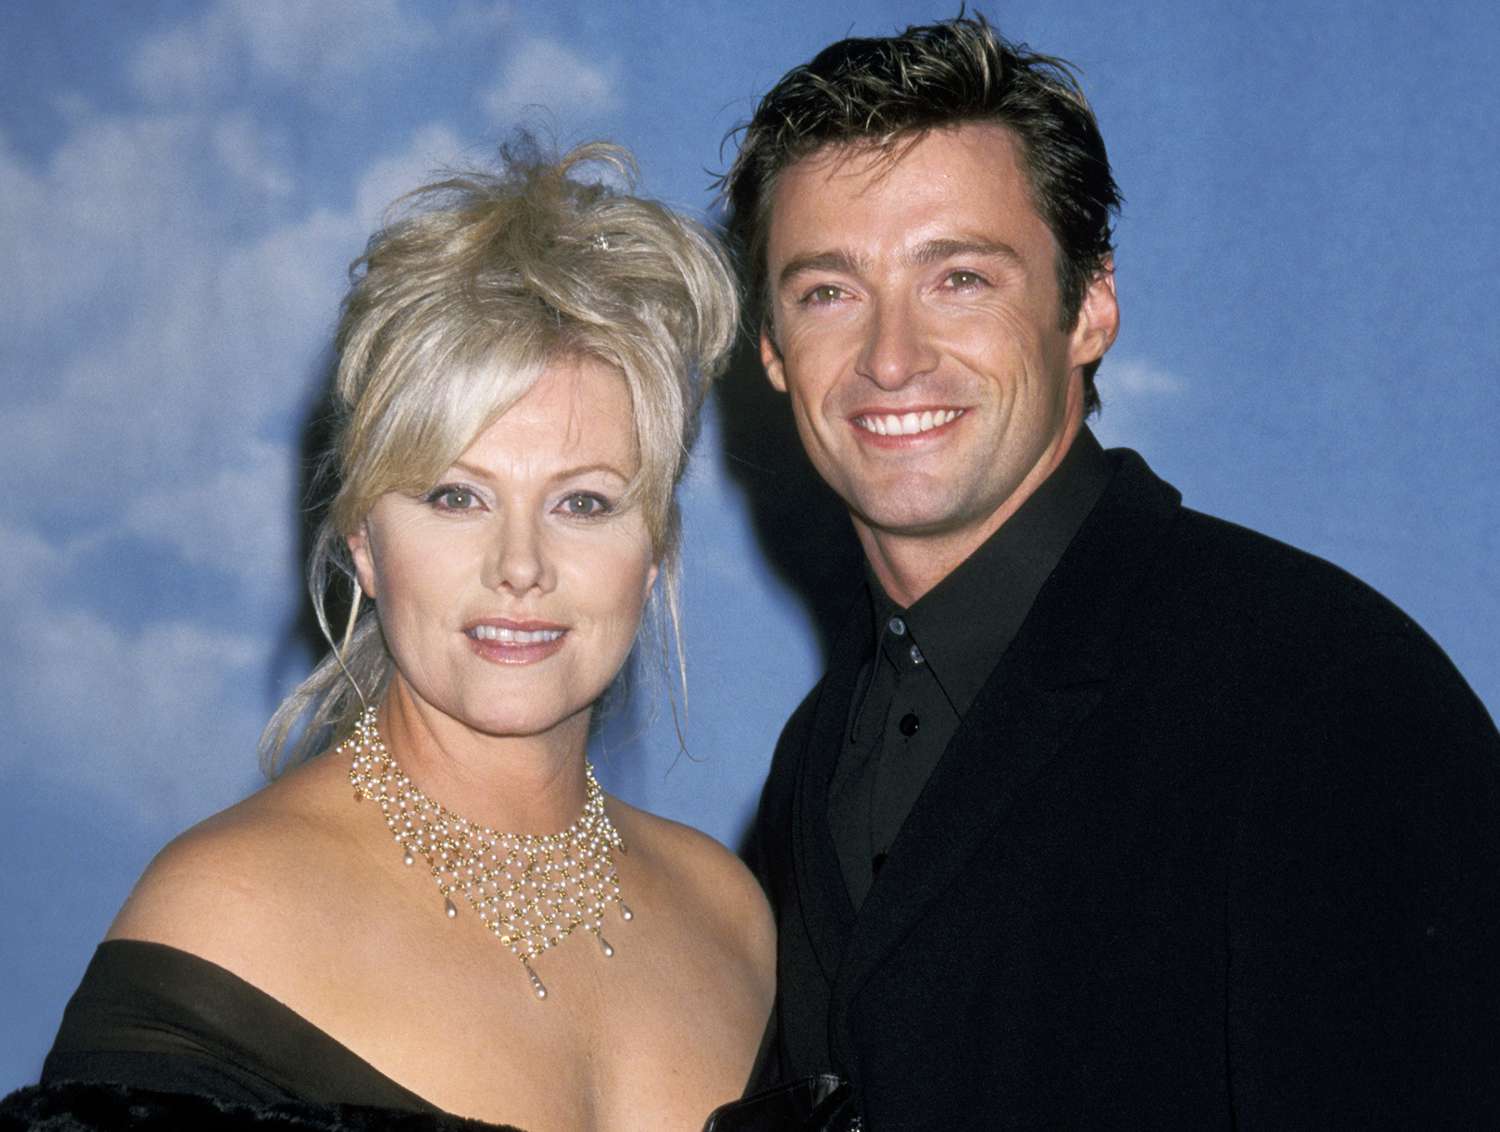 hugh jackman wife age difference